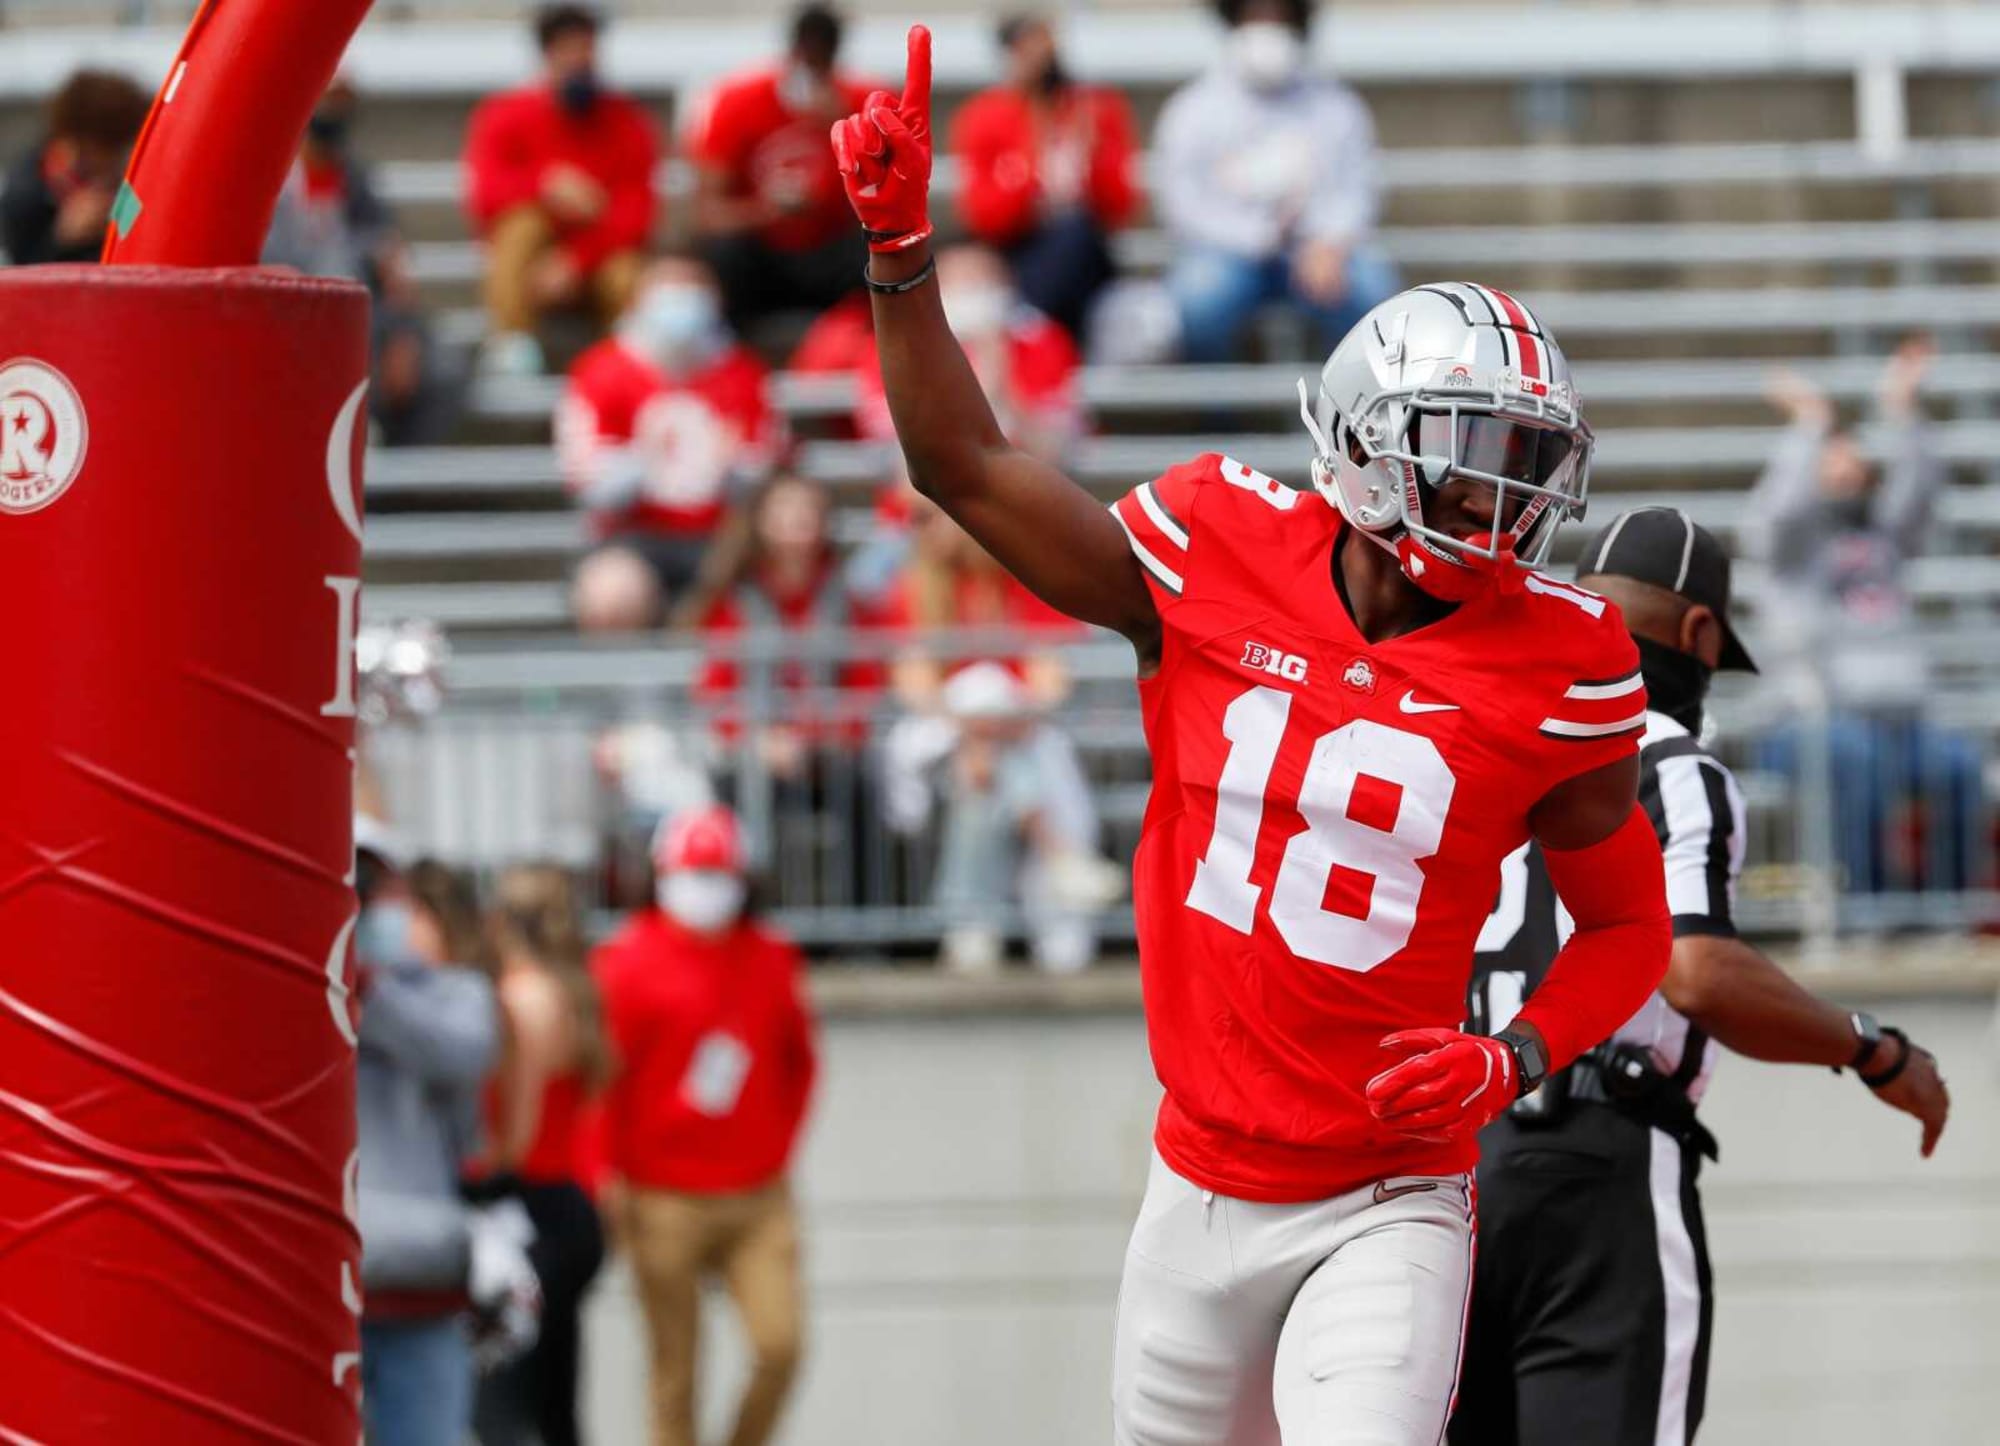 Ohio State Football: Marvin Harrison Jr. has high hopes for 2022